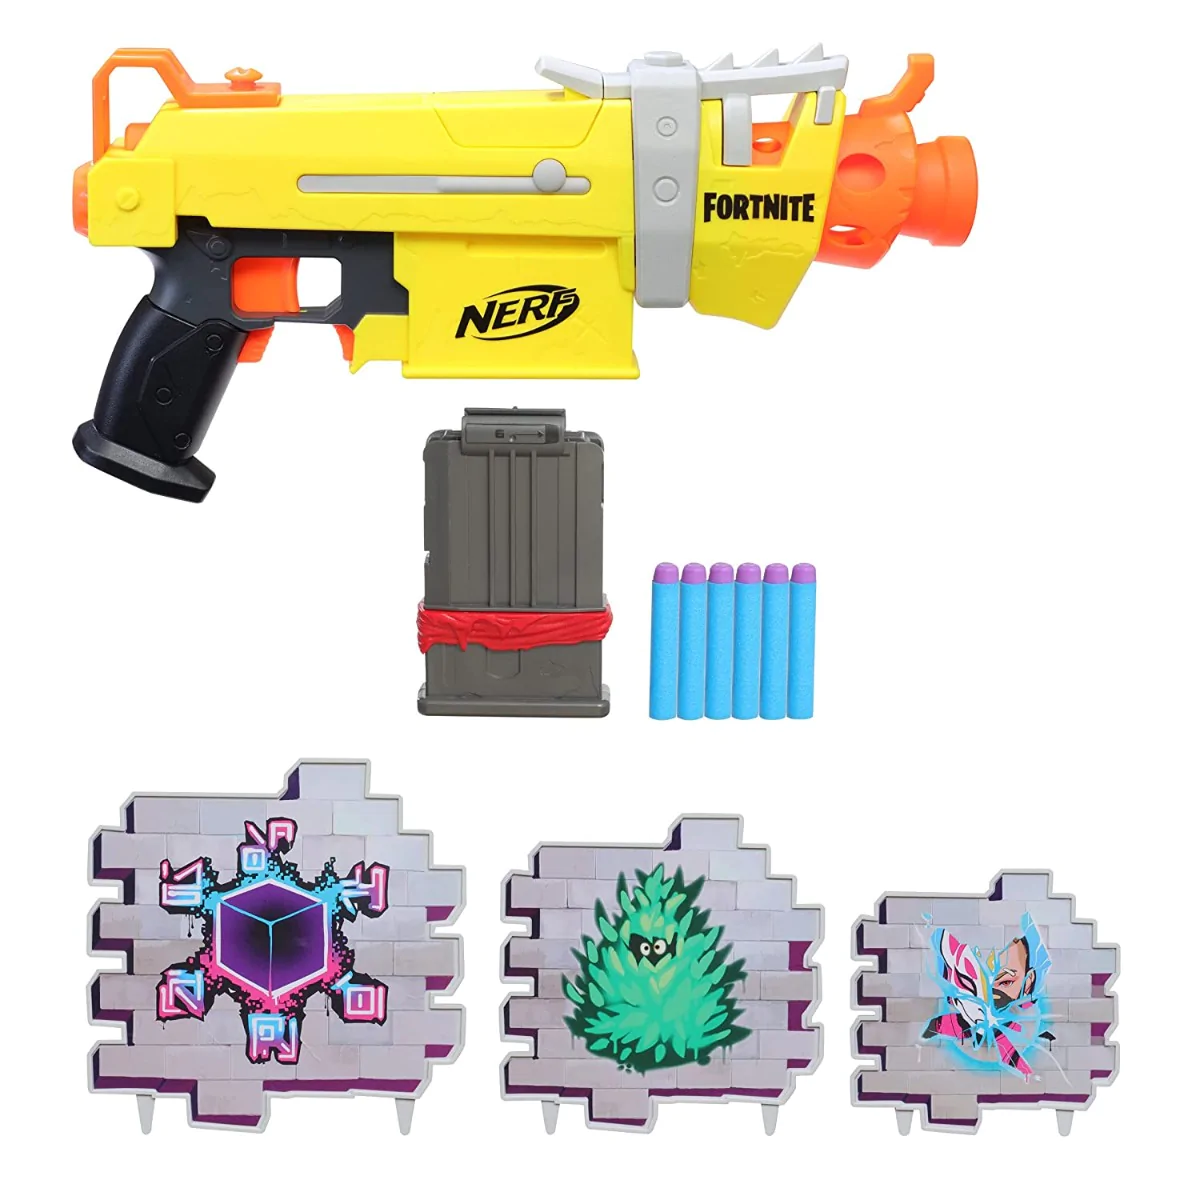 nerf_fortnite_smg-l_motorised_dart_blaster_includes_3_targets_comes_with_6-dart_clip_and_6_official_nerf_elite_darts_3